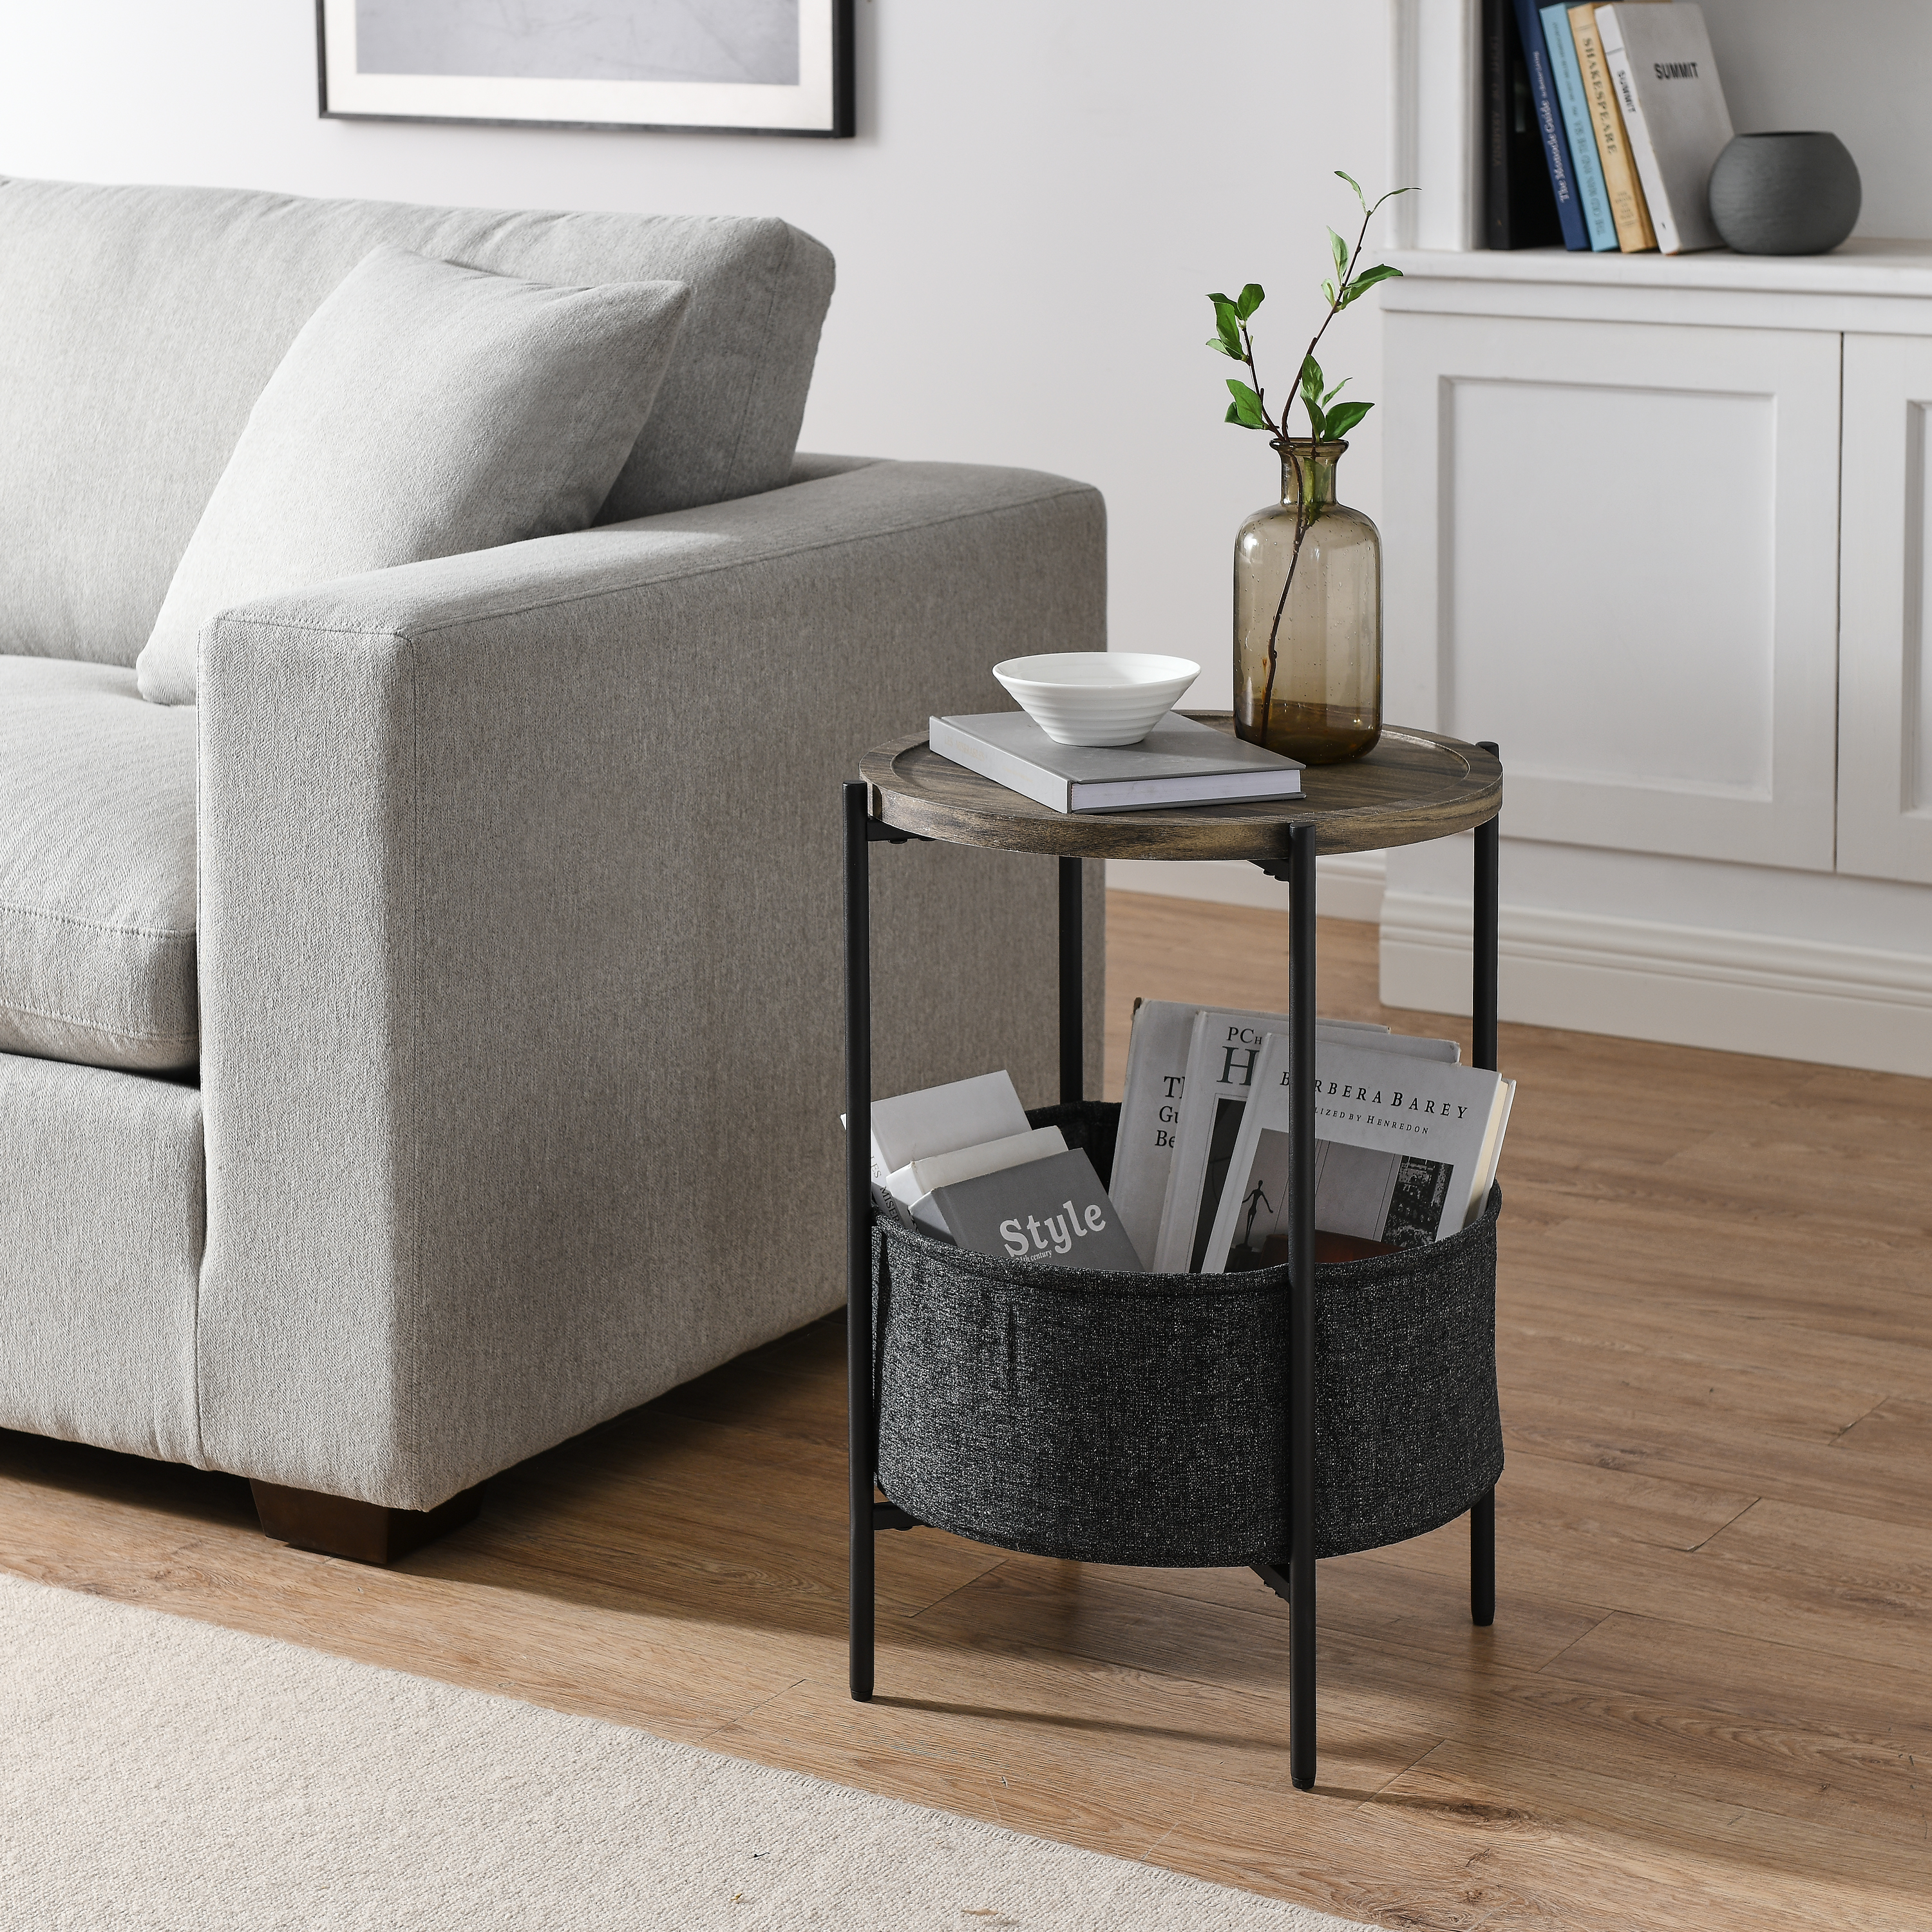 Modern Accent End Table with Storage Basket，Grey Cloth Bag and Brown Top （18&ldquo;x18&rdquo;x24&ldquo;）-Boyel Living